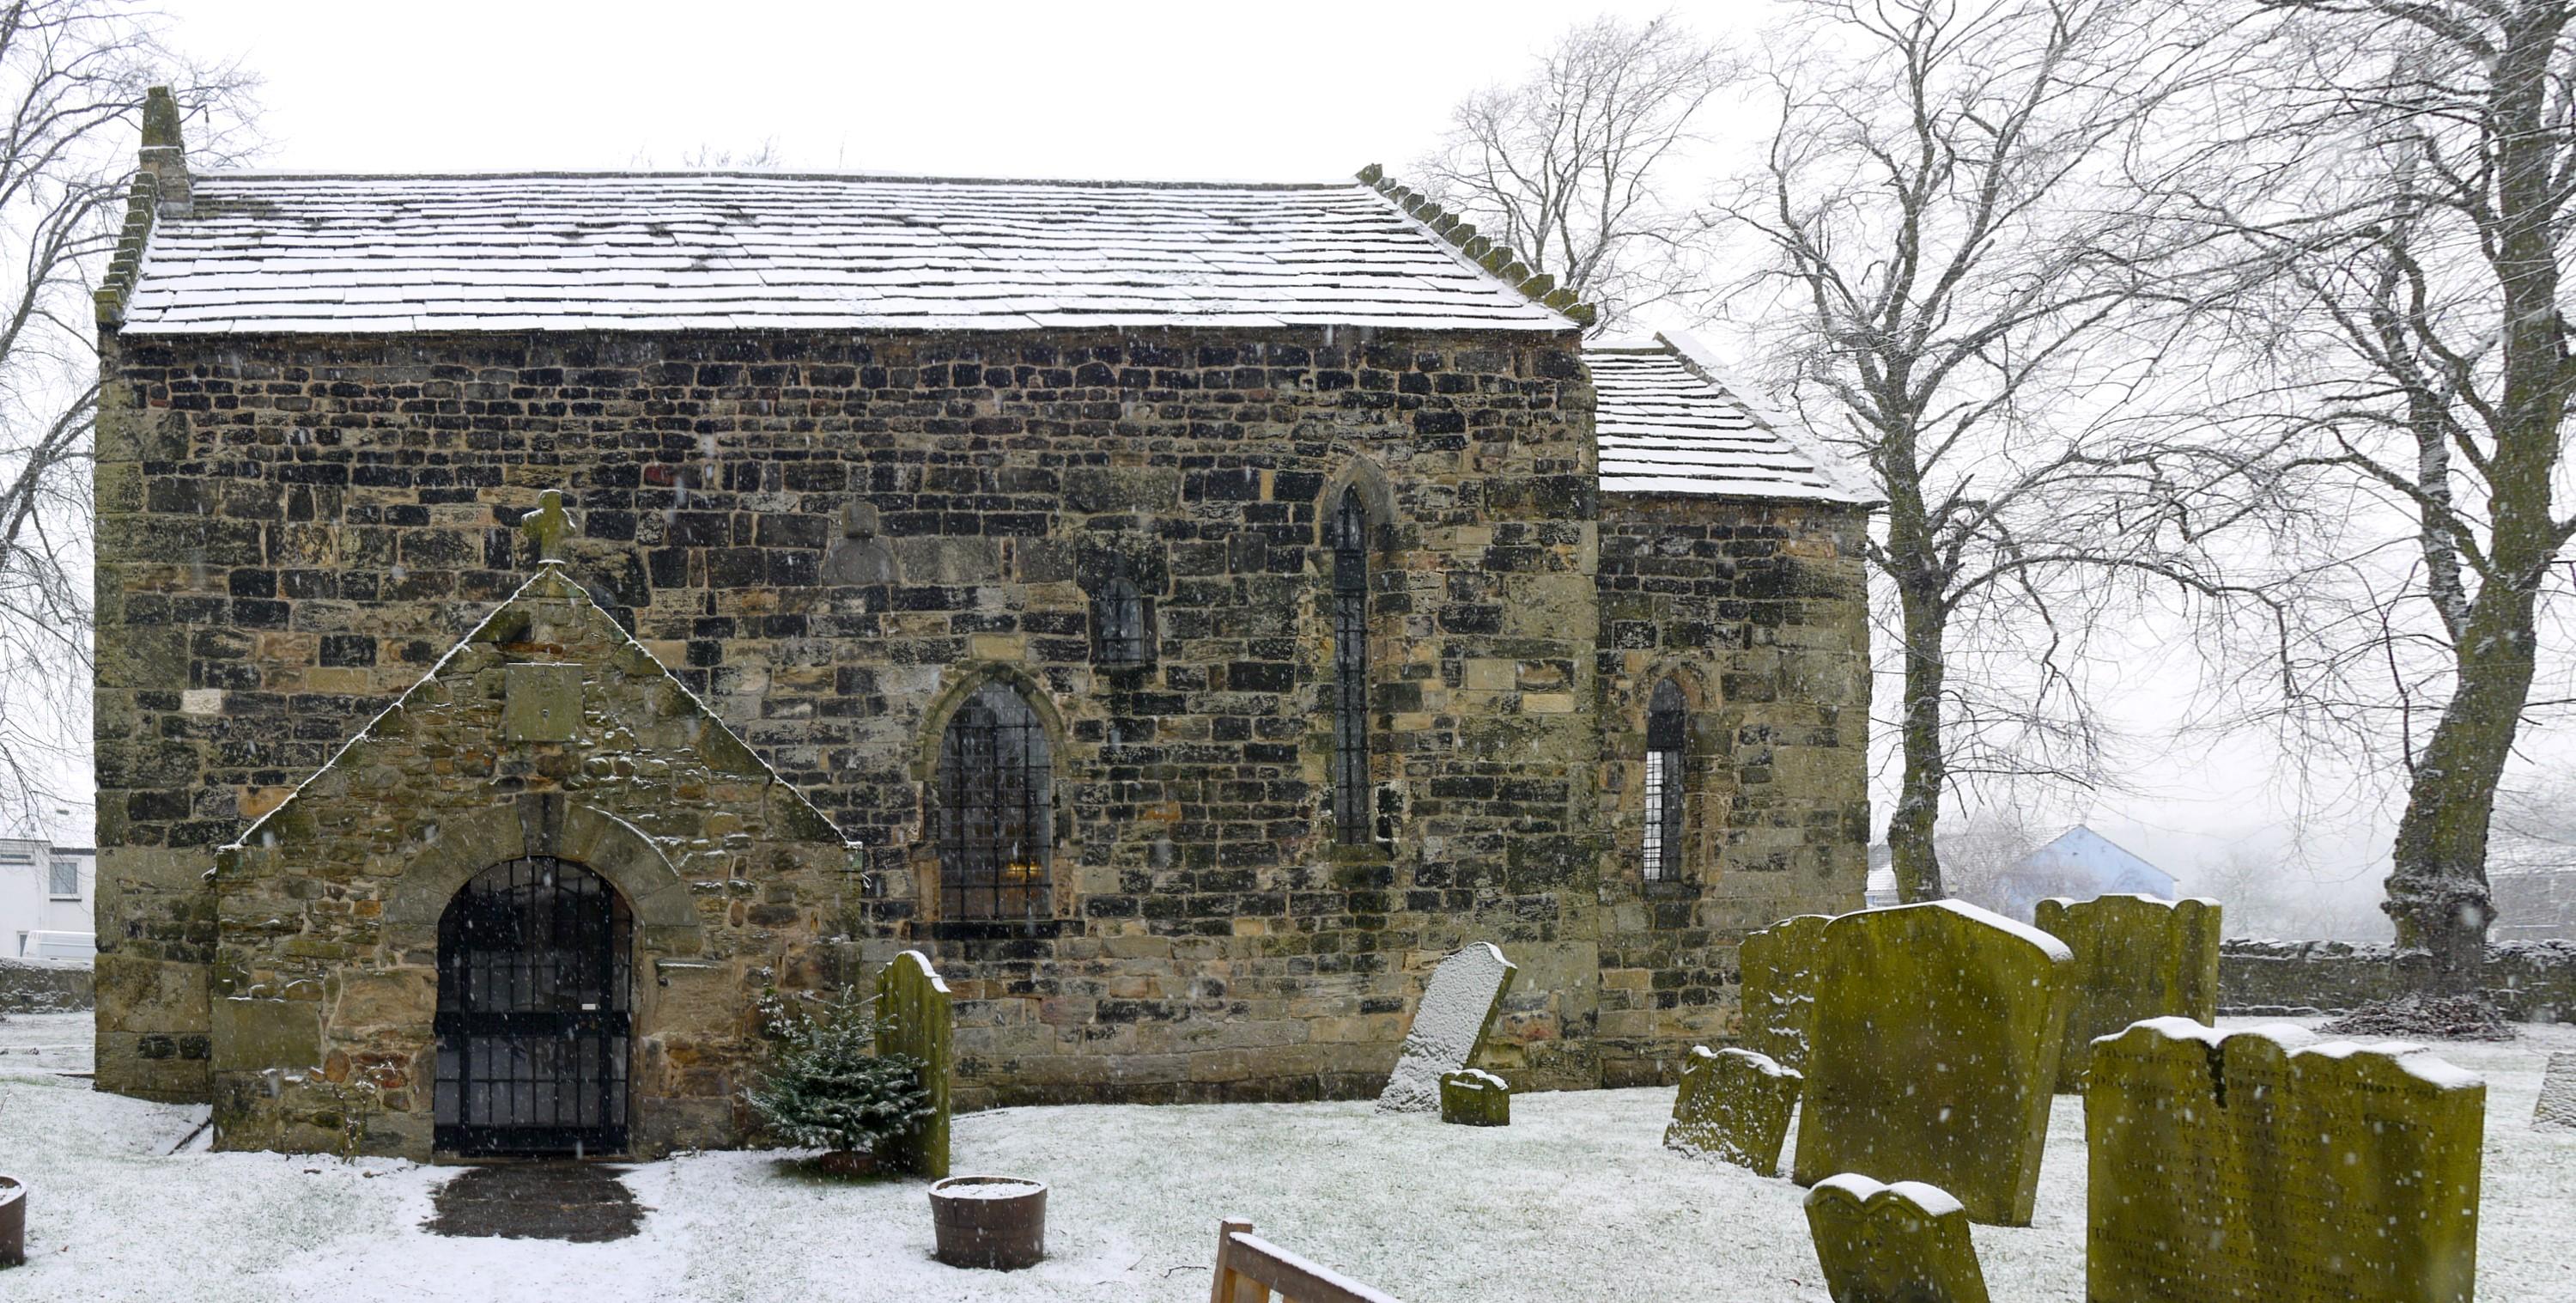 CountyDurhamESCOMBESaxonChurch(andrewcurtisCC-BY-SA2.0)1